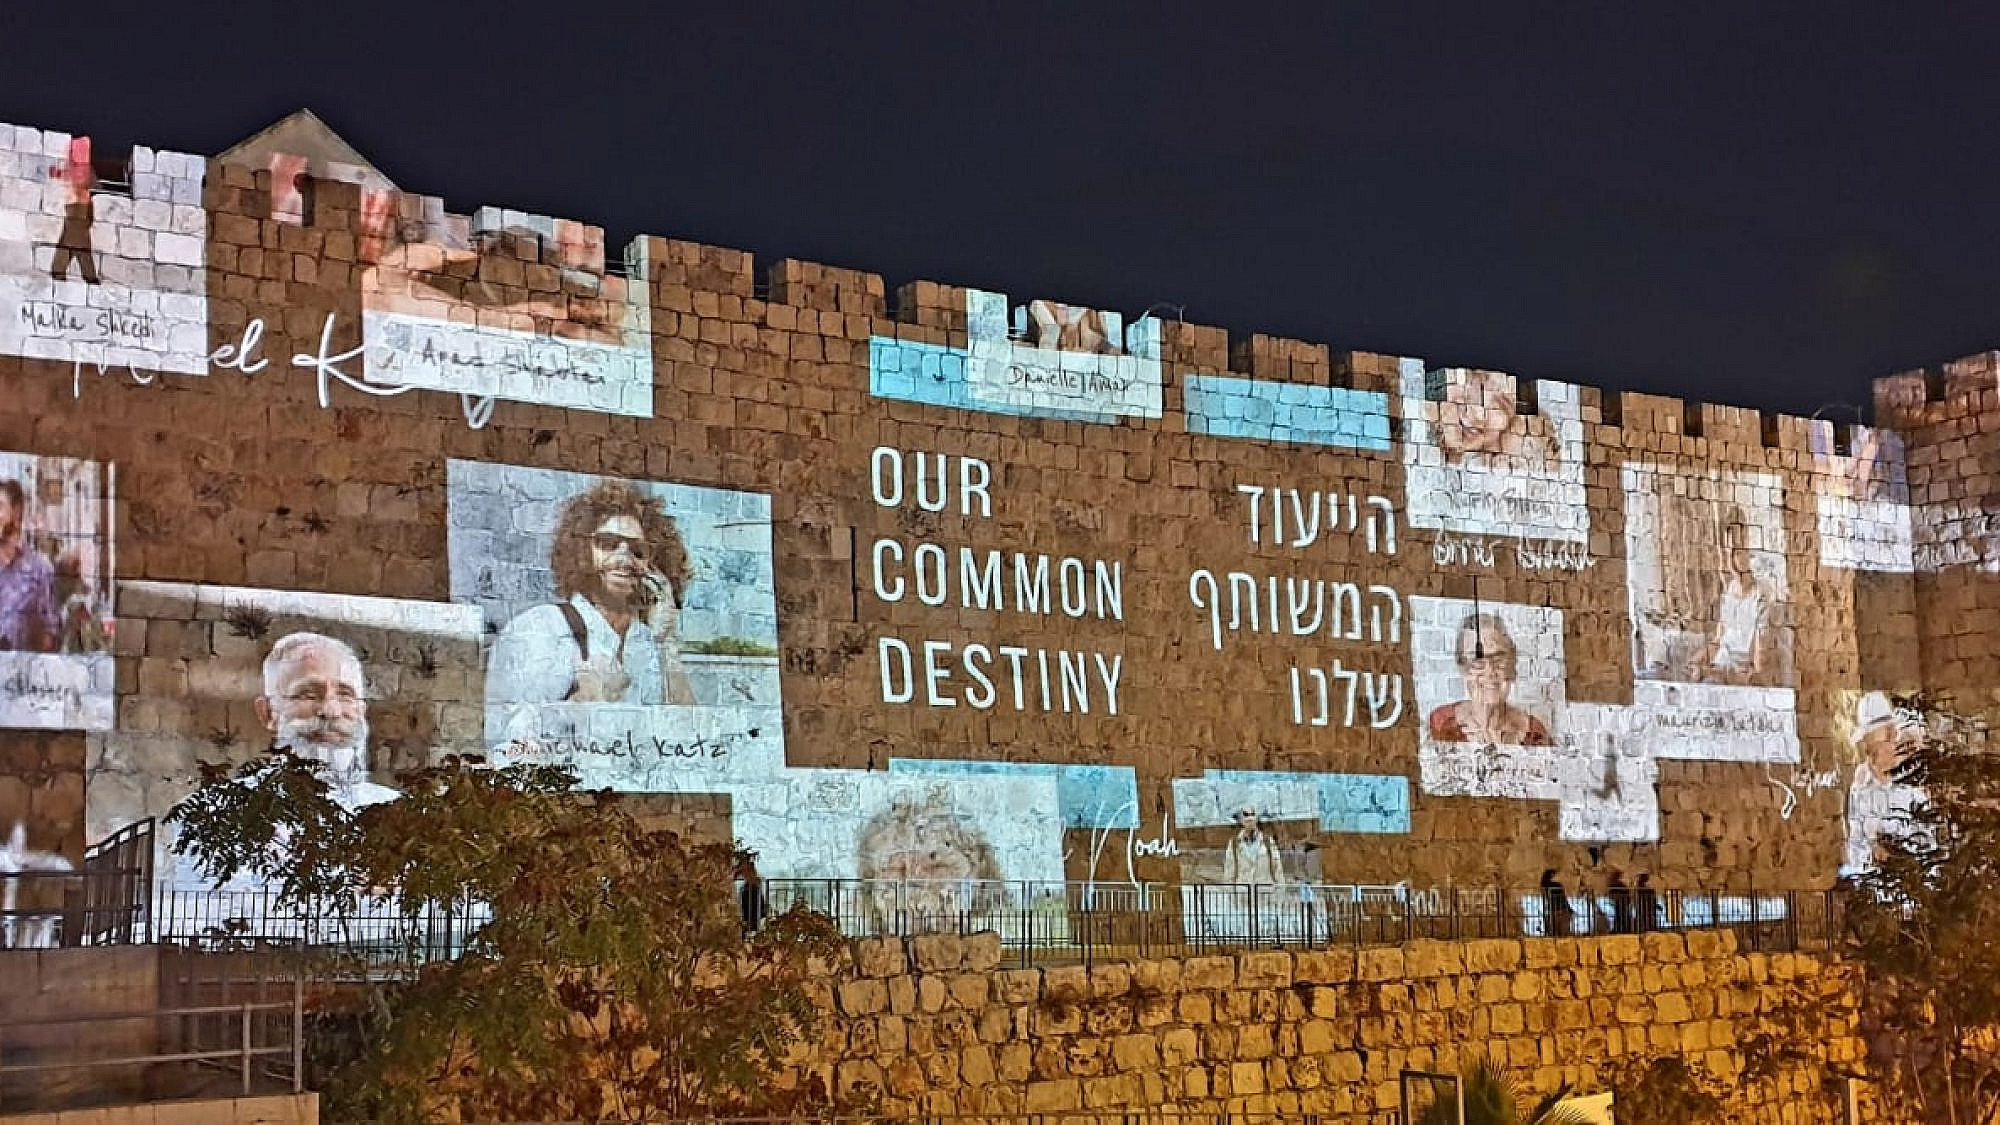 A view of the walls of the Old City of Jerusalem illuminated with the Our Common Destiny initiative. Credit: Avishag Shaar-Yashuv.